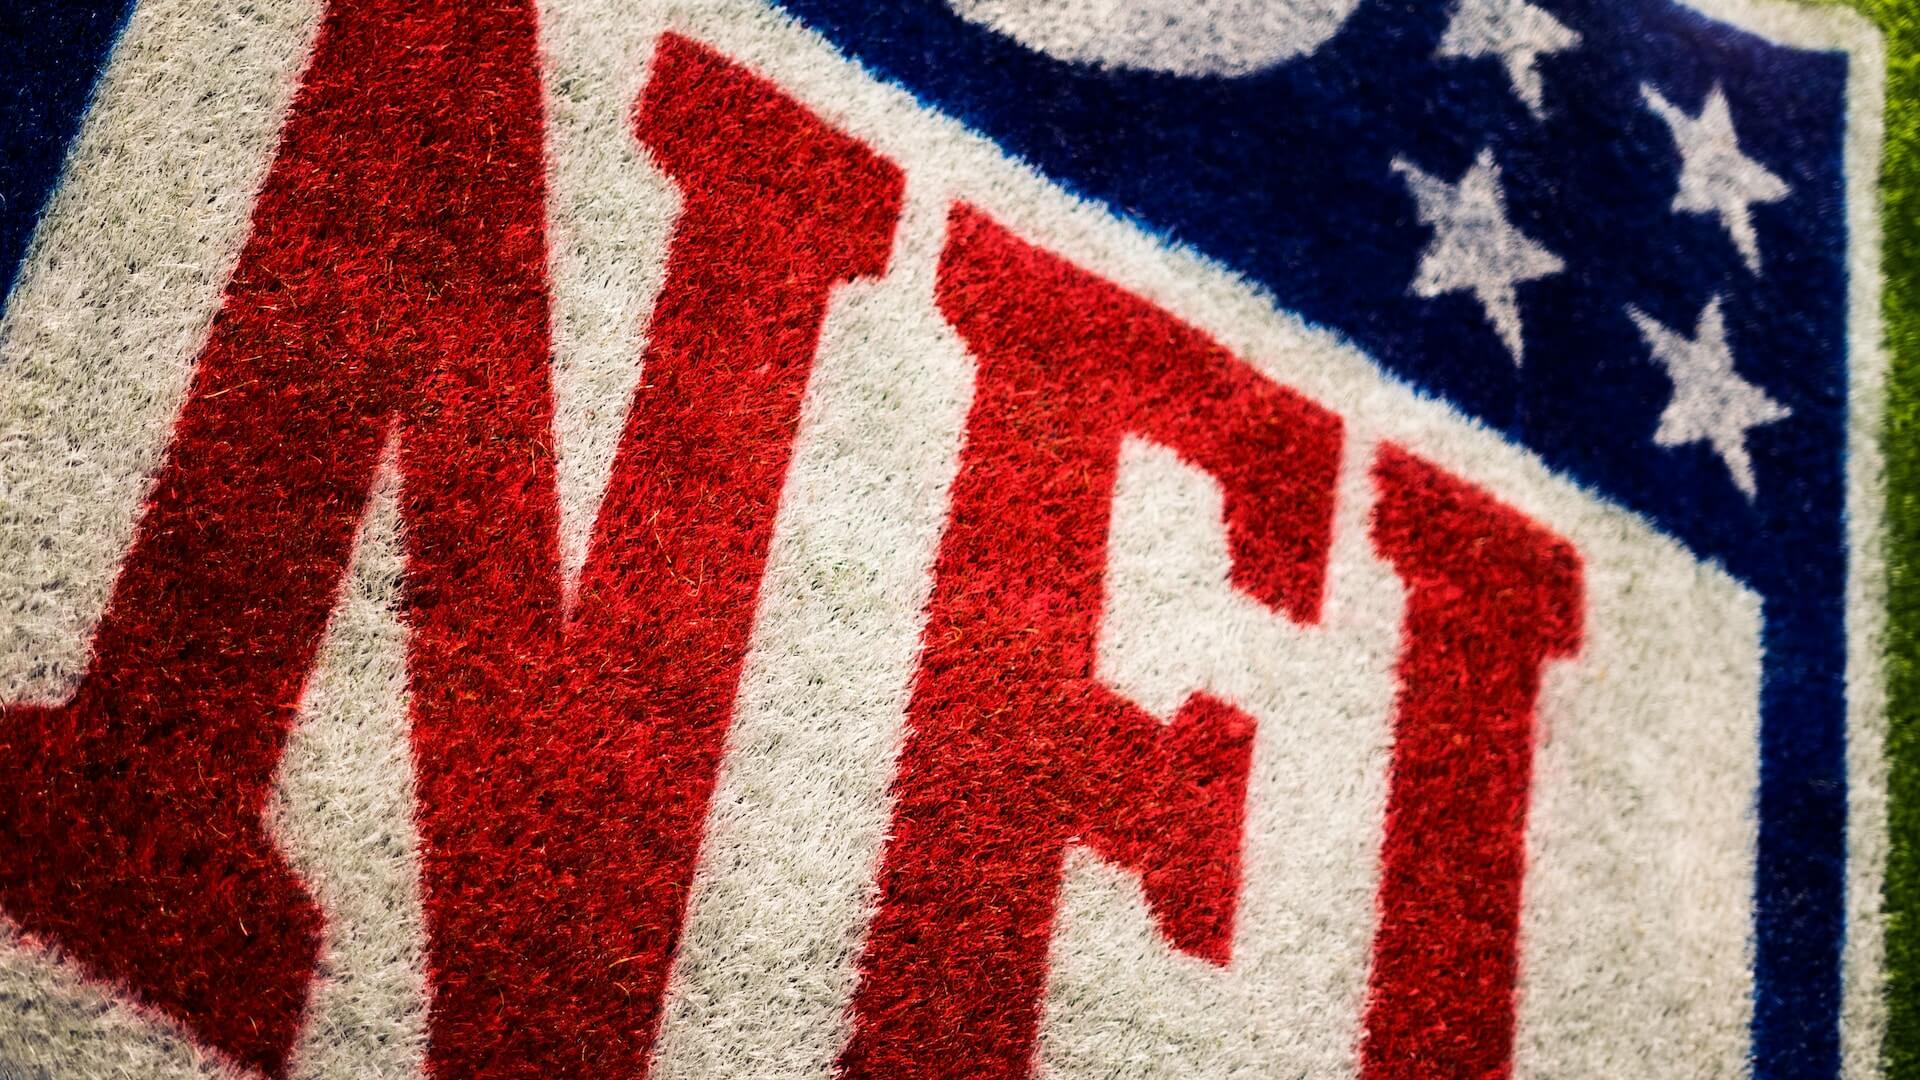 Closeup shot of the NFL logo painted onto turf or grass